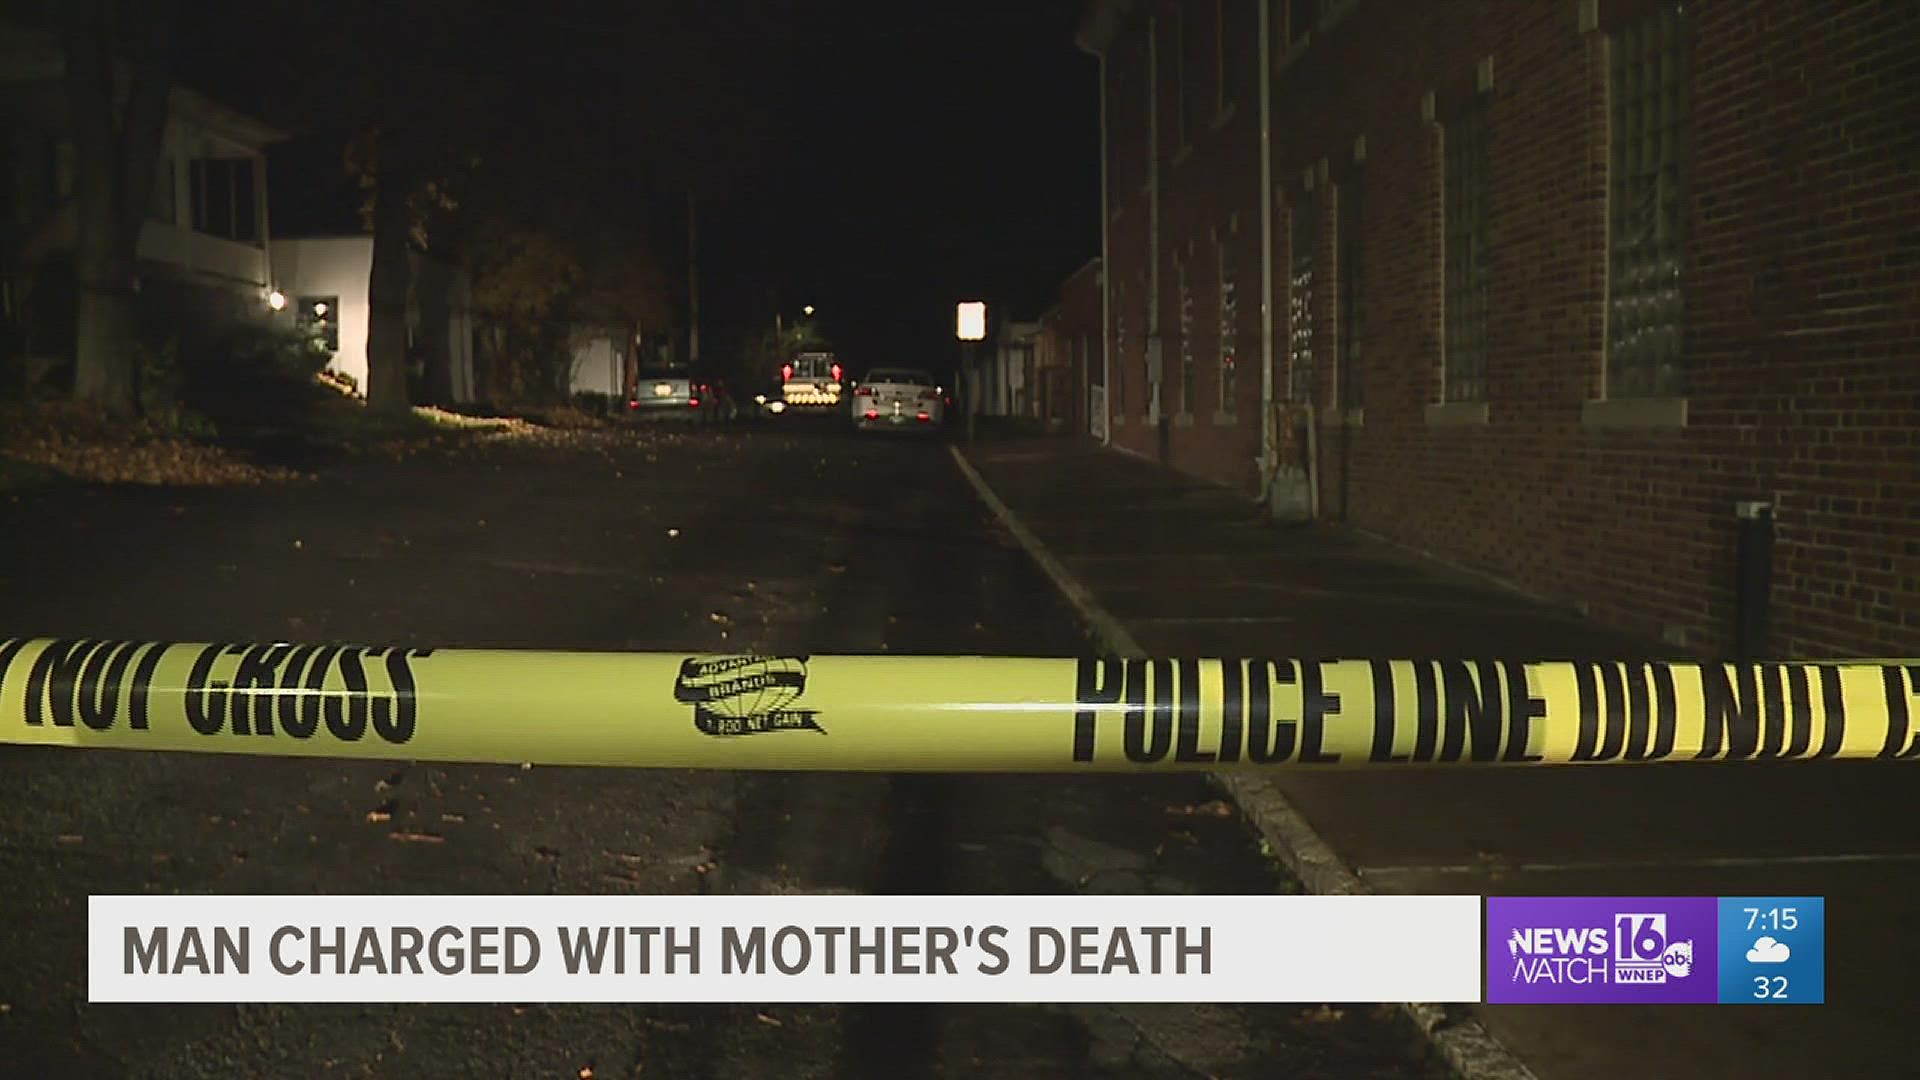 Police found the mother's body wrapped in blankets in her bedroom on Sunday.